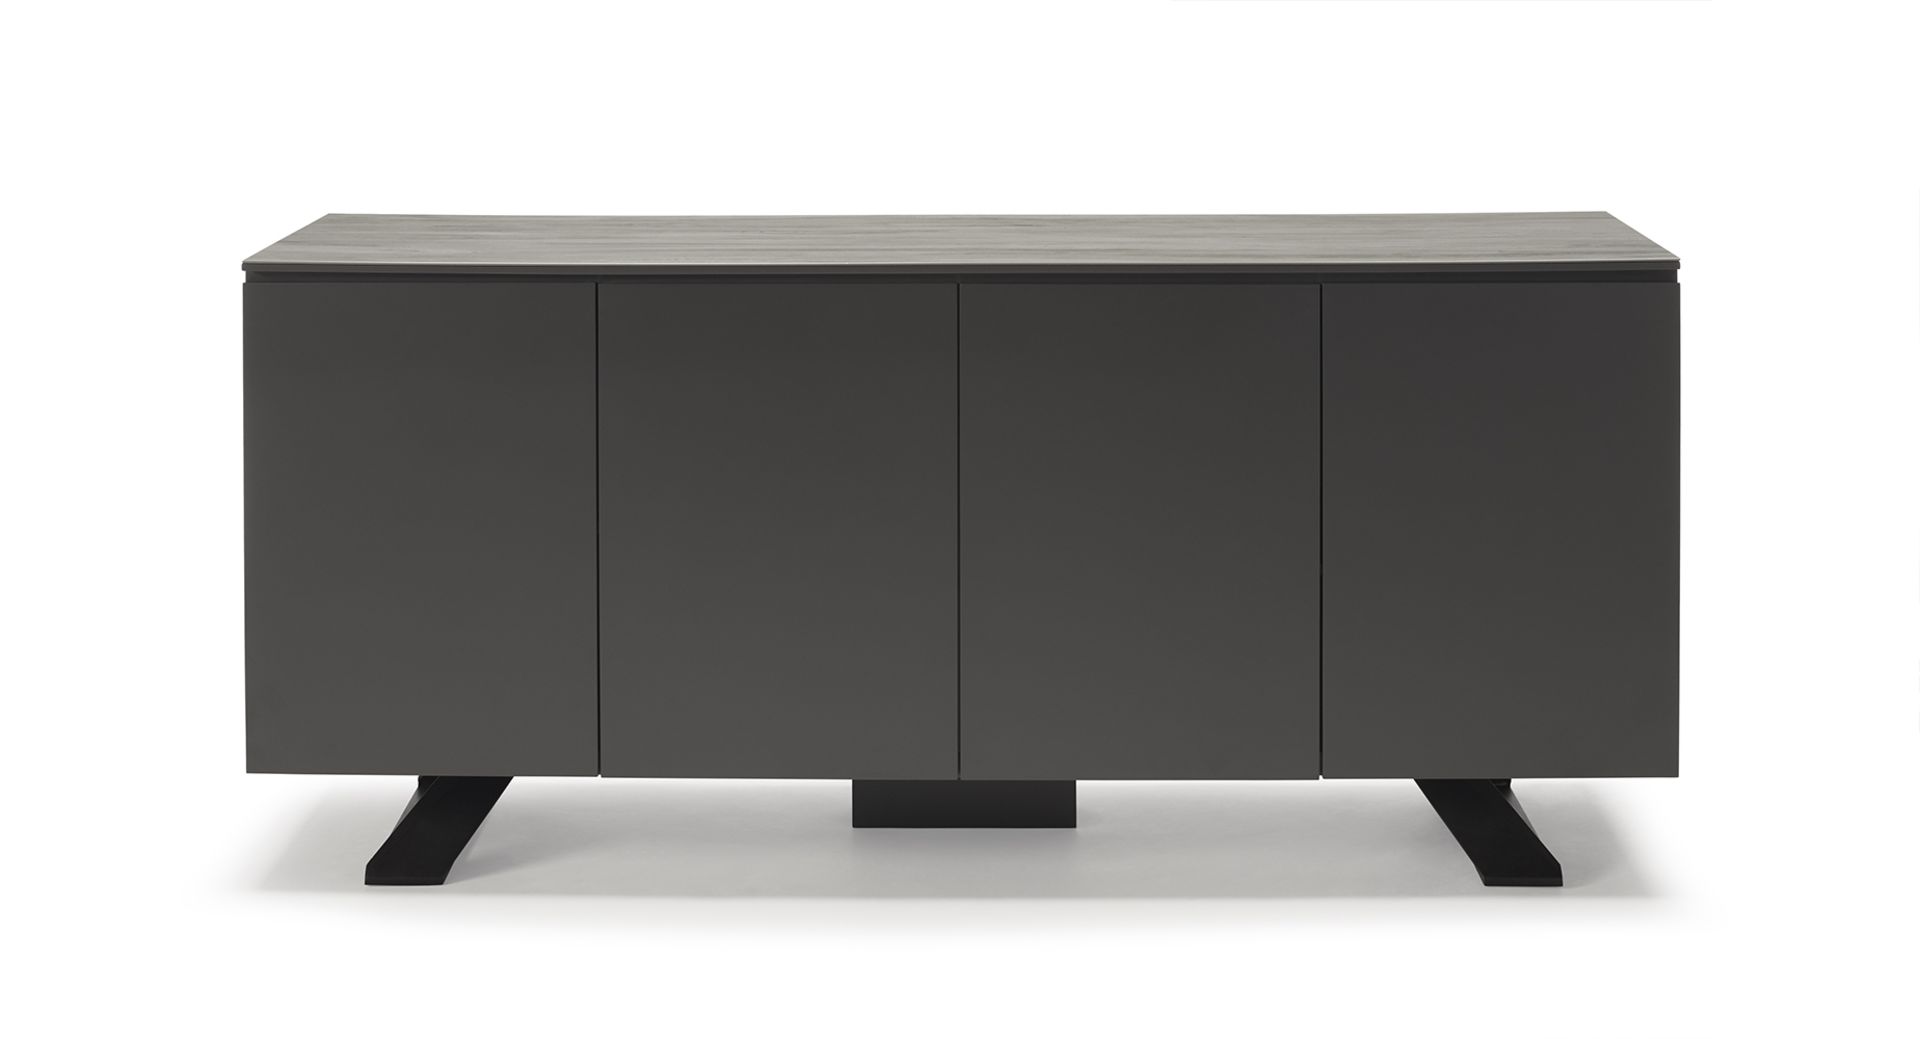 Spartan Sideboard by Kesterport The Spartan Four Door Sideboard provides is striking as a stand - Bild 8 aus 8